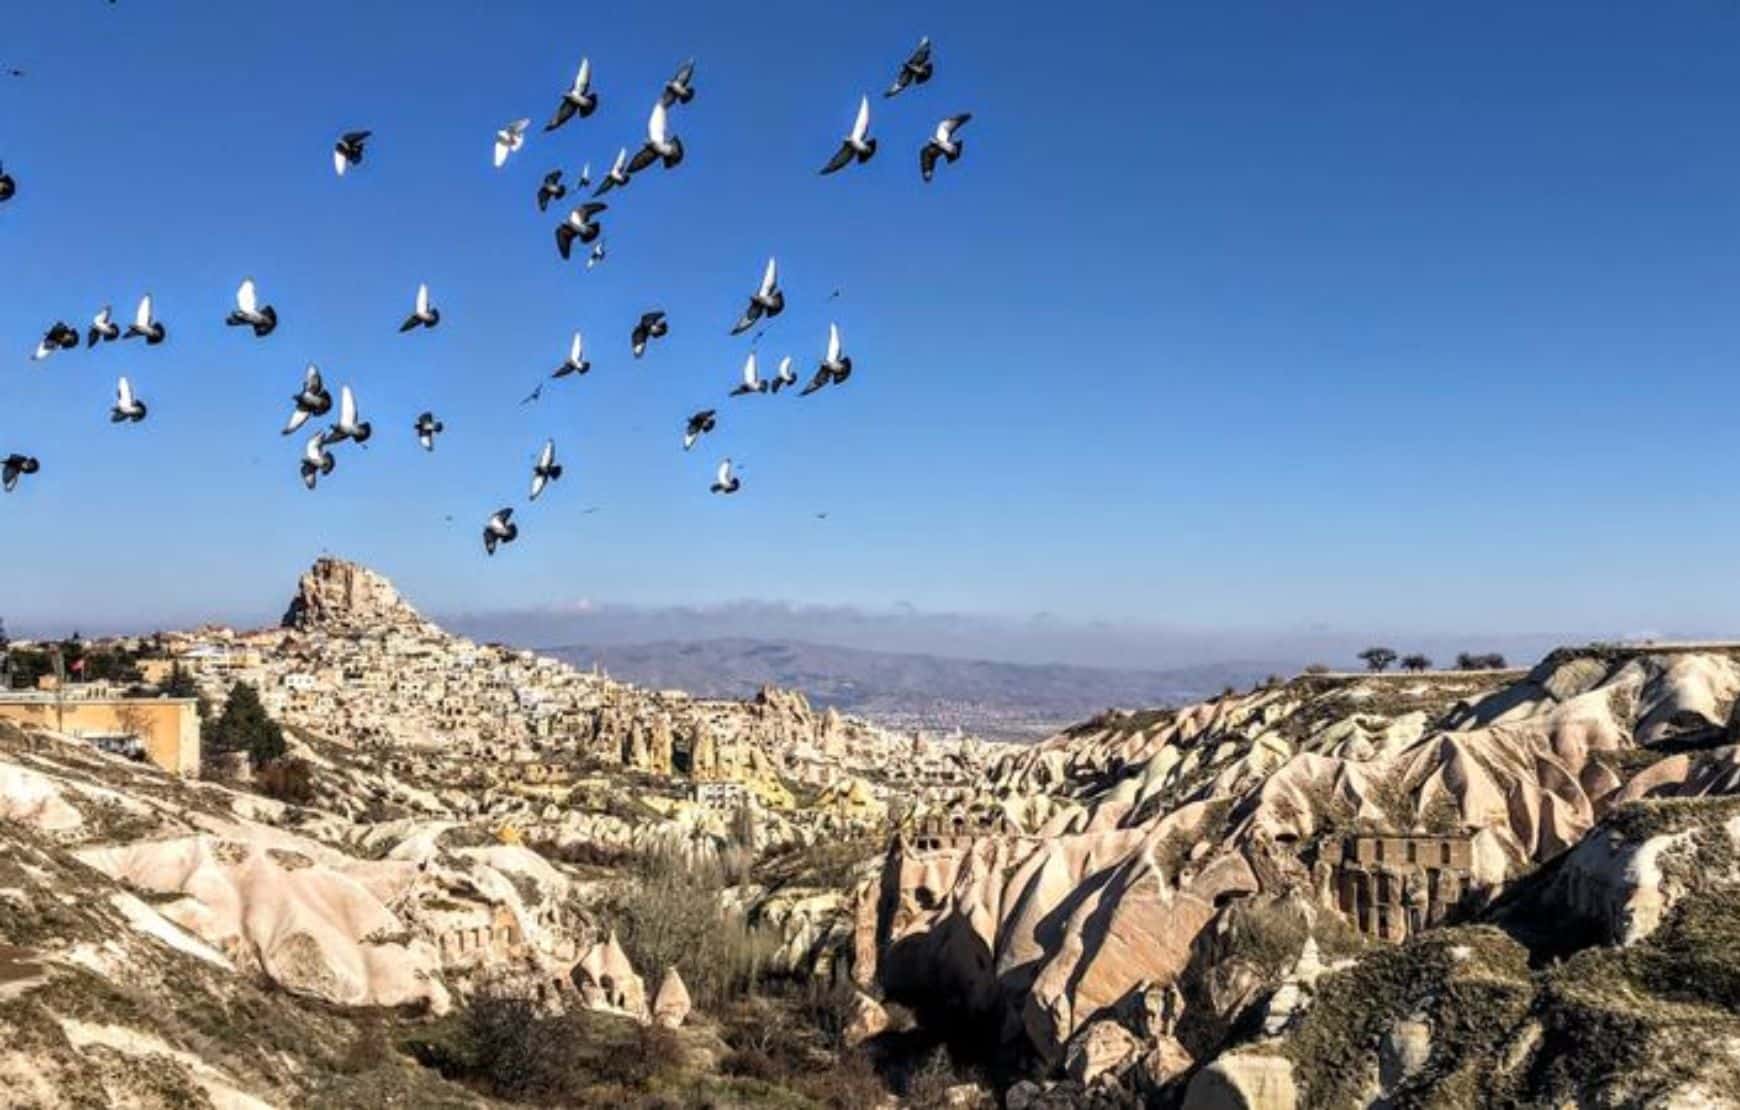 Yellow Tour in Cappadocia includes stop in pigeon valley